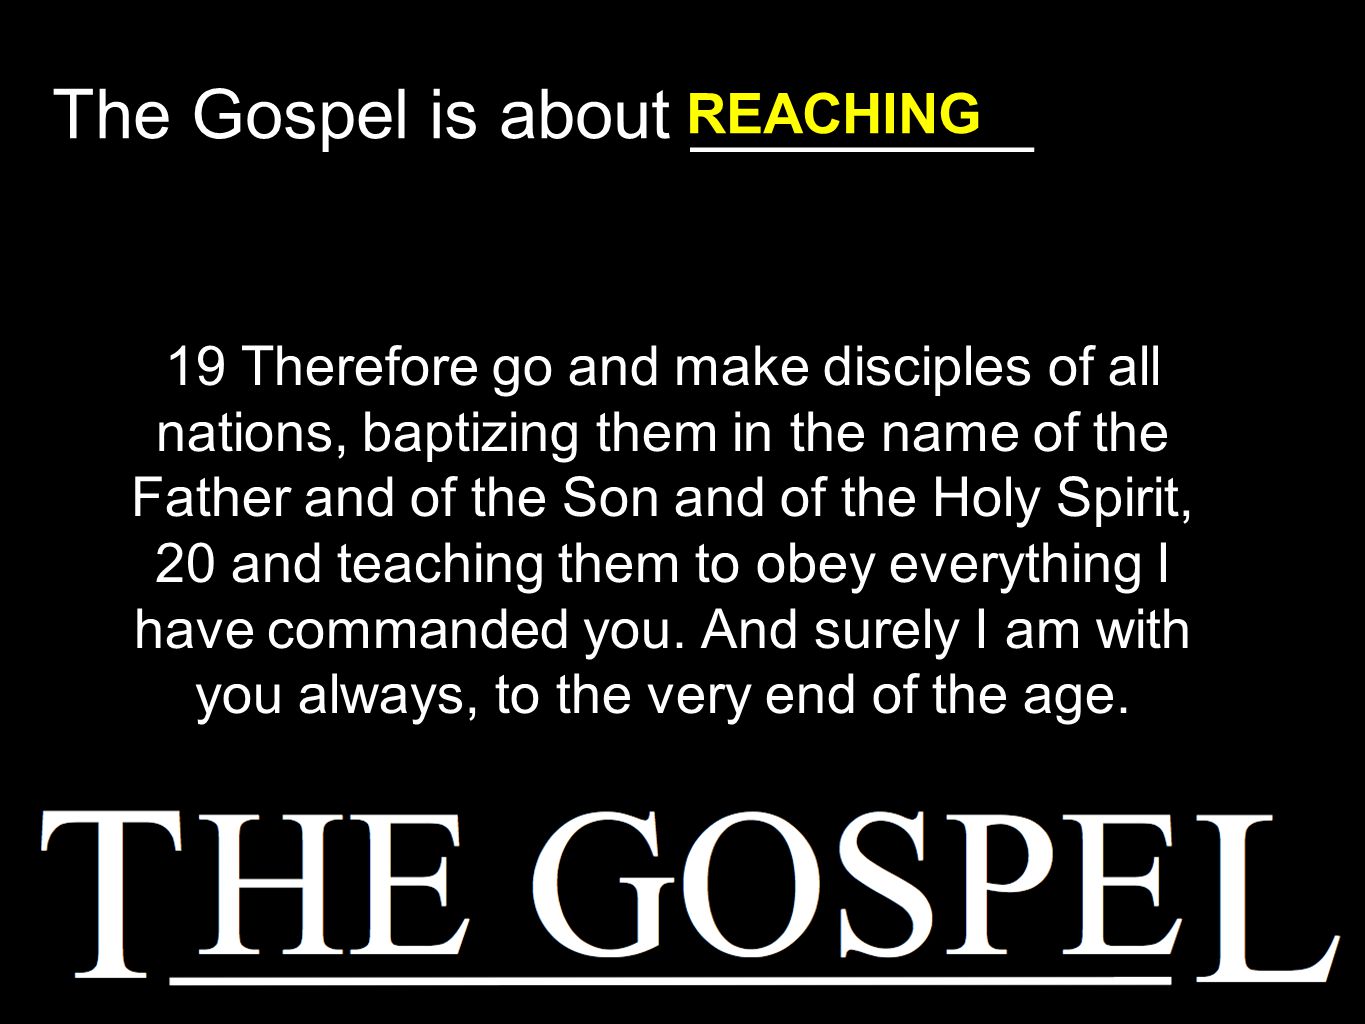 19 Therefore go and make disciples of all nations, baptizing them in the name of the Father and of the Son and of the Holy Spirit, 20 and teaching them to obey everything I have commanded you.